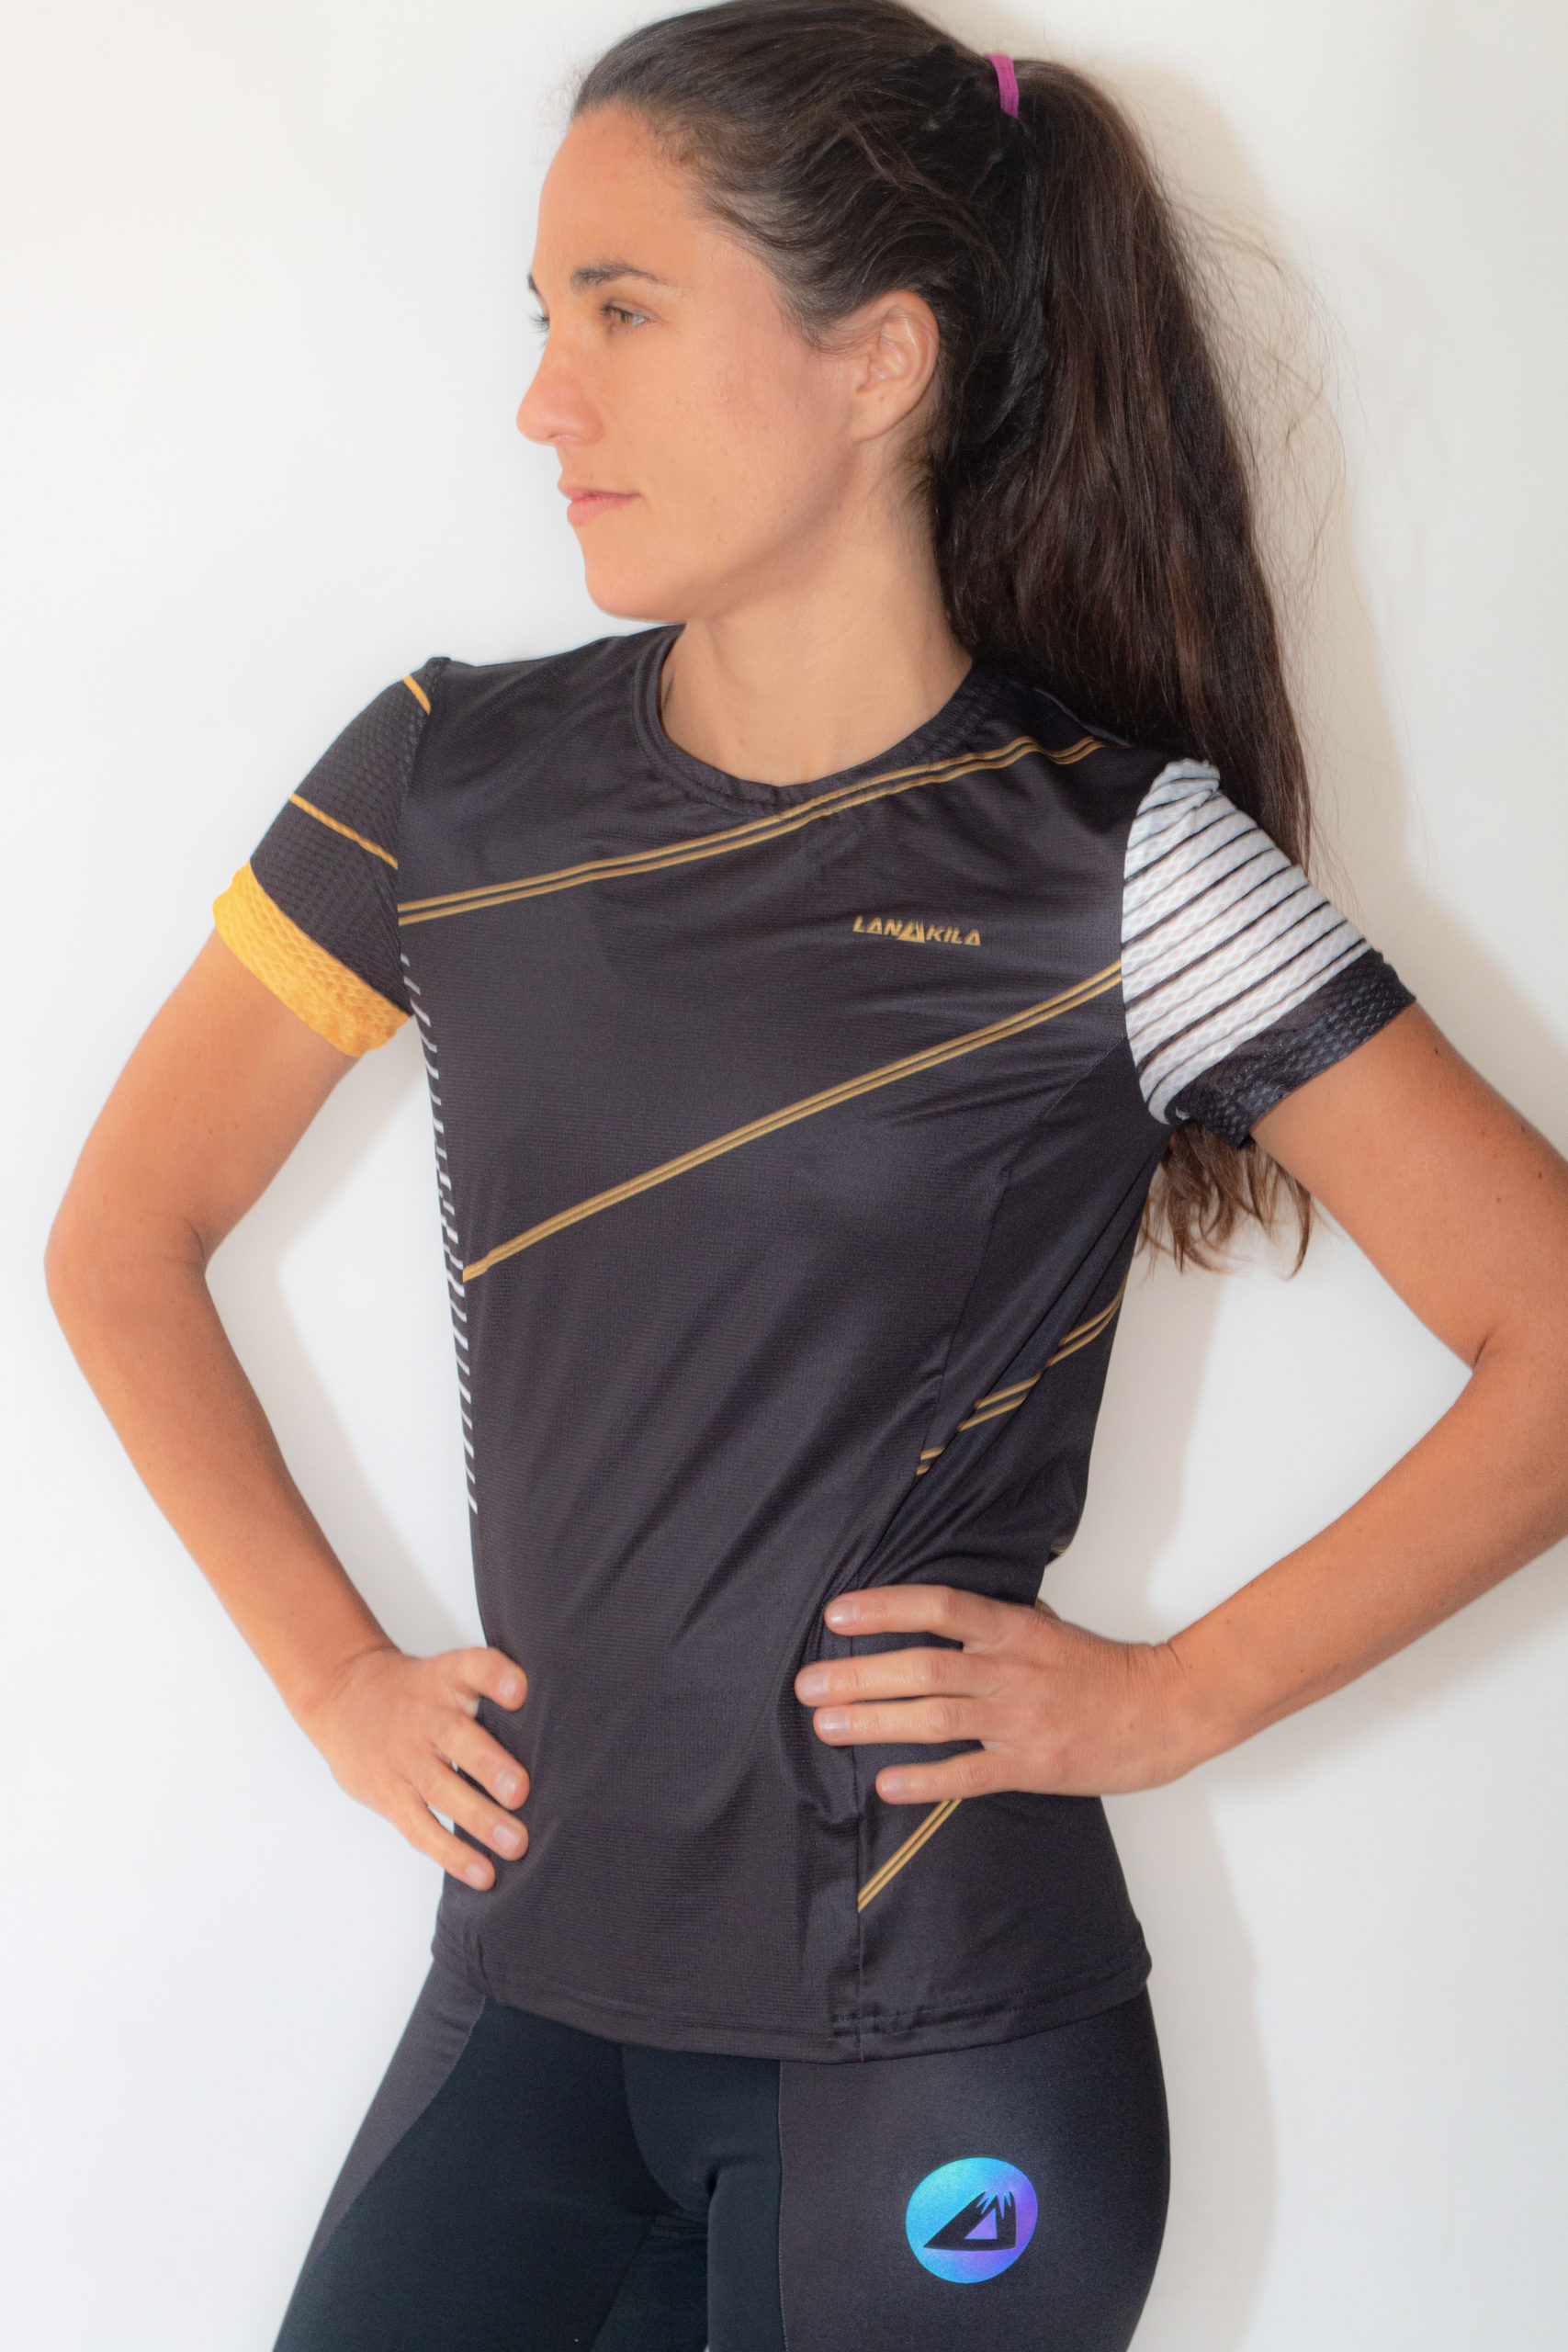 Lanakila Performance T for Running- black_gold – recycled